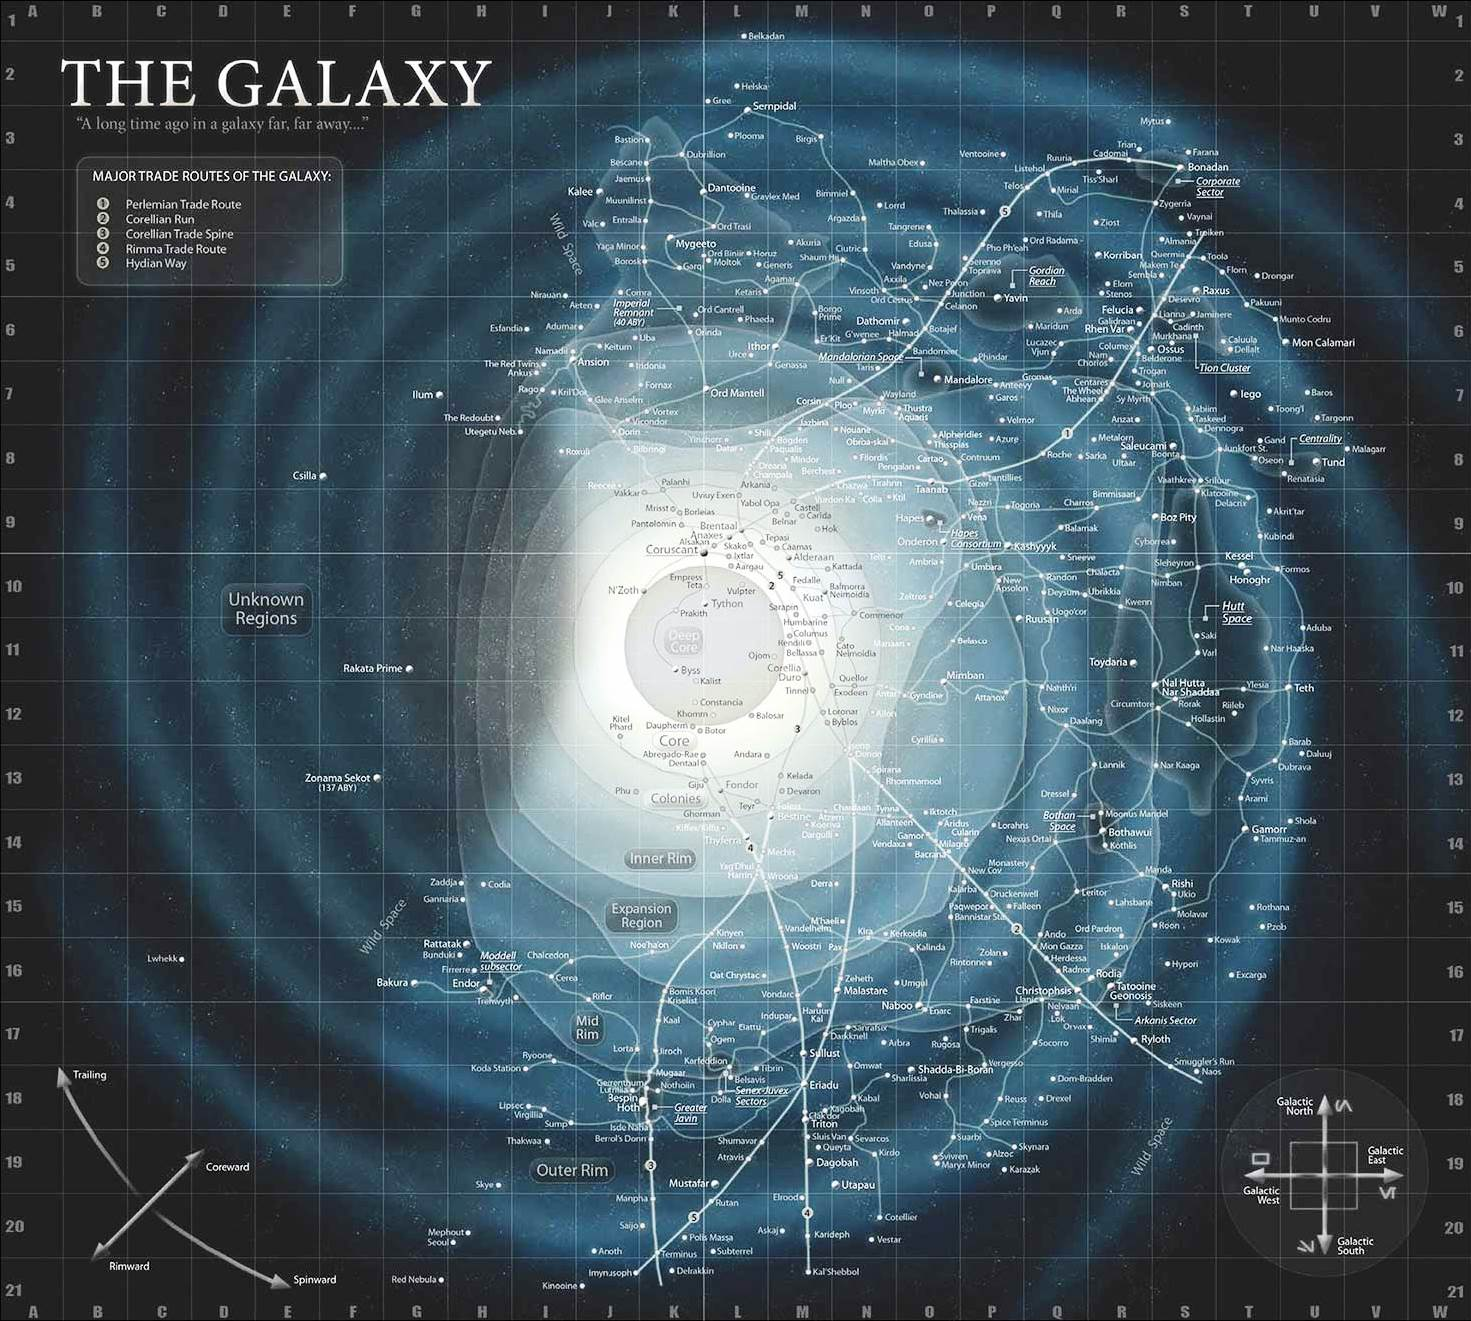 official star wars galactic map The Galaxy Wookieepedia Fandom official star wars galactic map